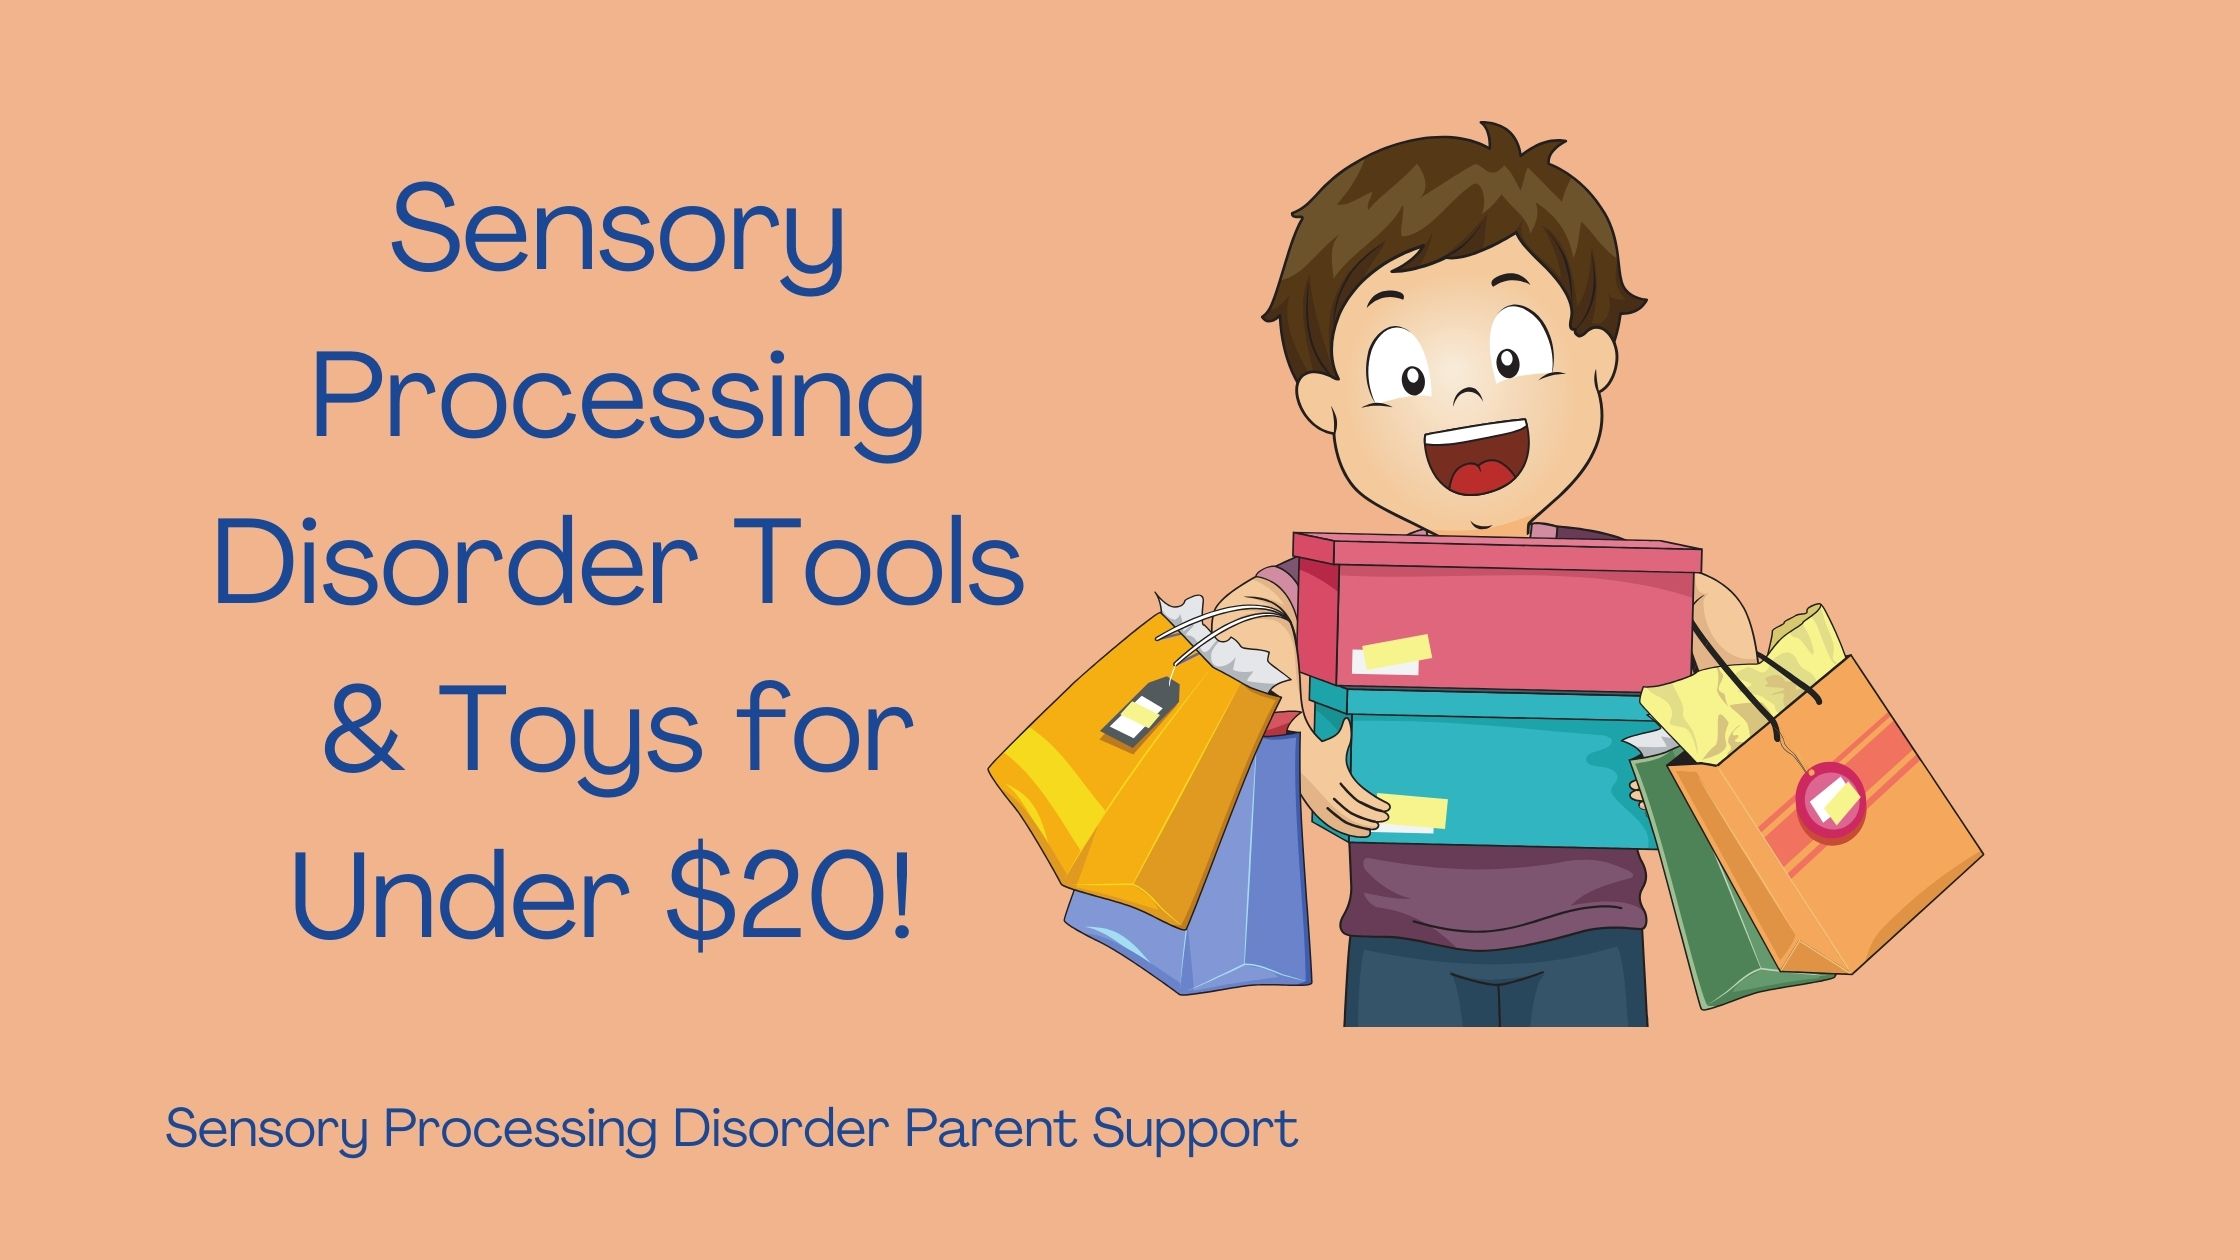 child with sensory processing disorder holding shopping bags Sensory Processing Disorder Tools & Toys for Under $20!